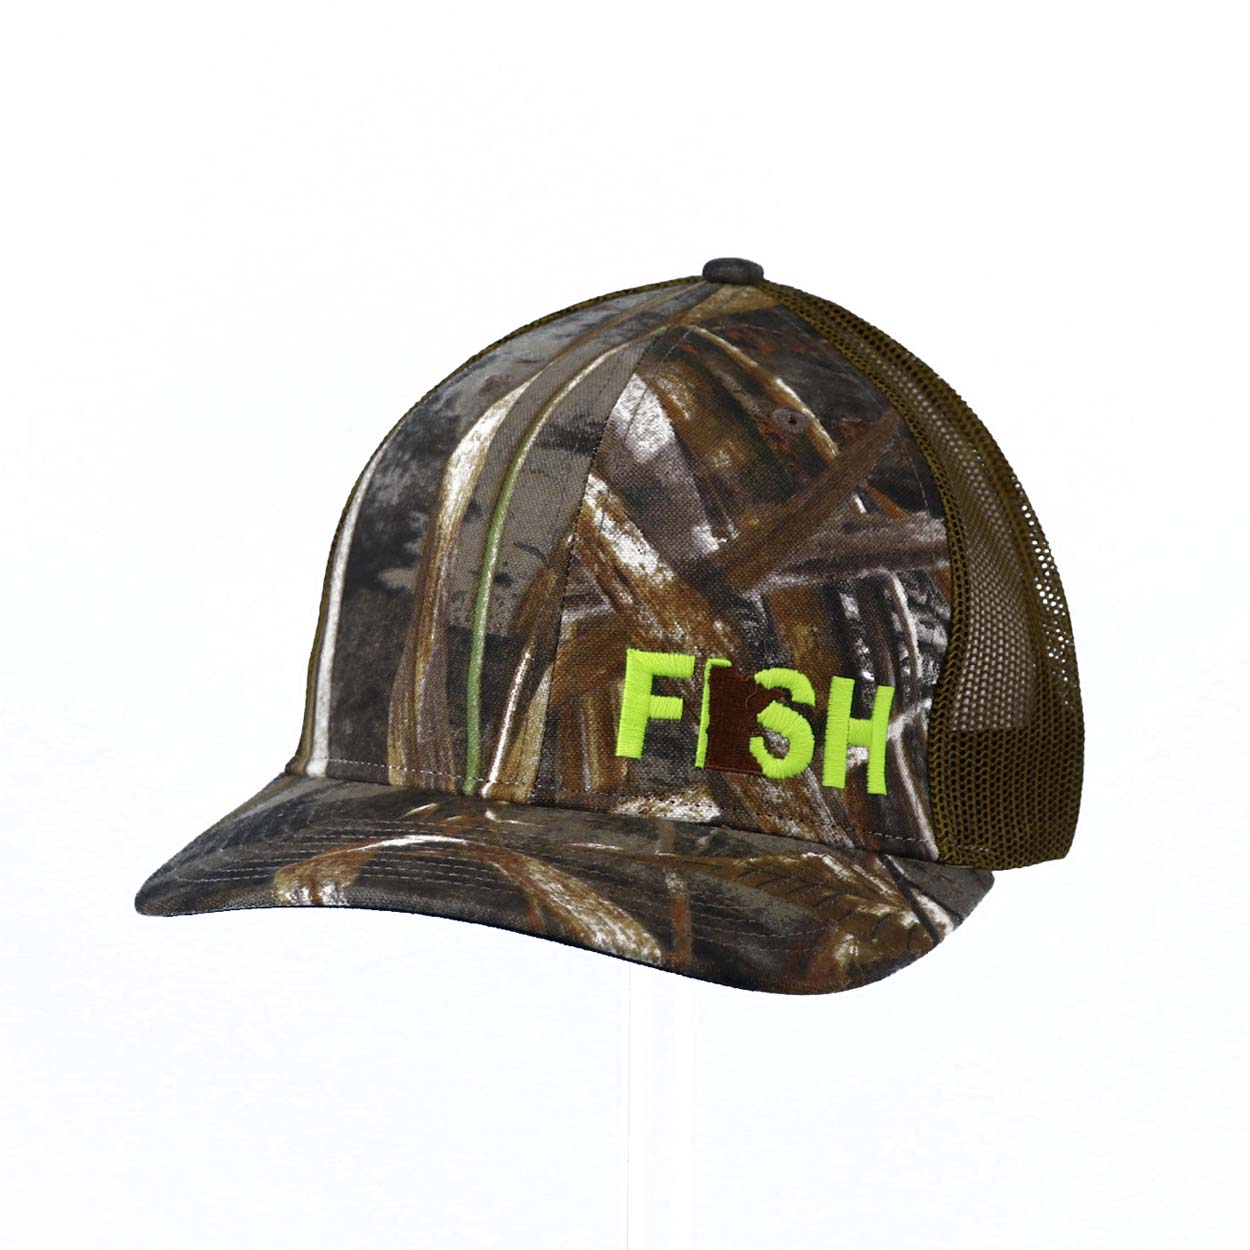 Fish Minnesota Night Out Pro Embroidered Snapback Trucker Hat Realtree Camo Brown/Neon Yellow